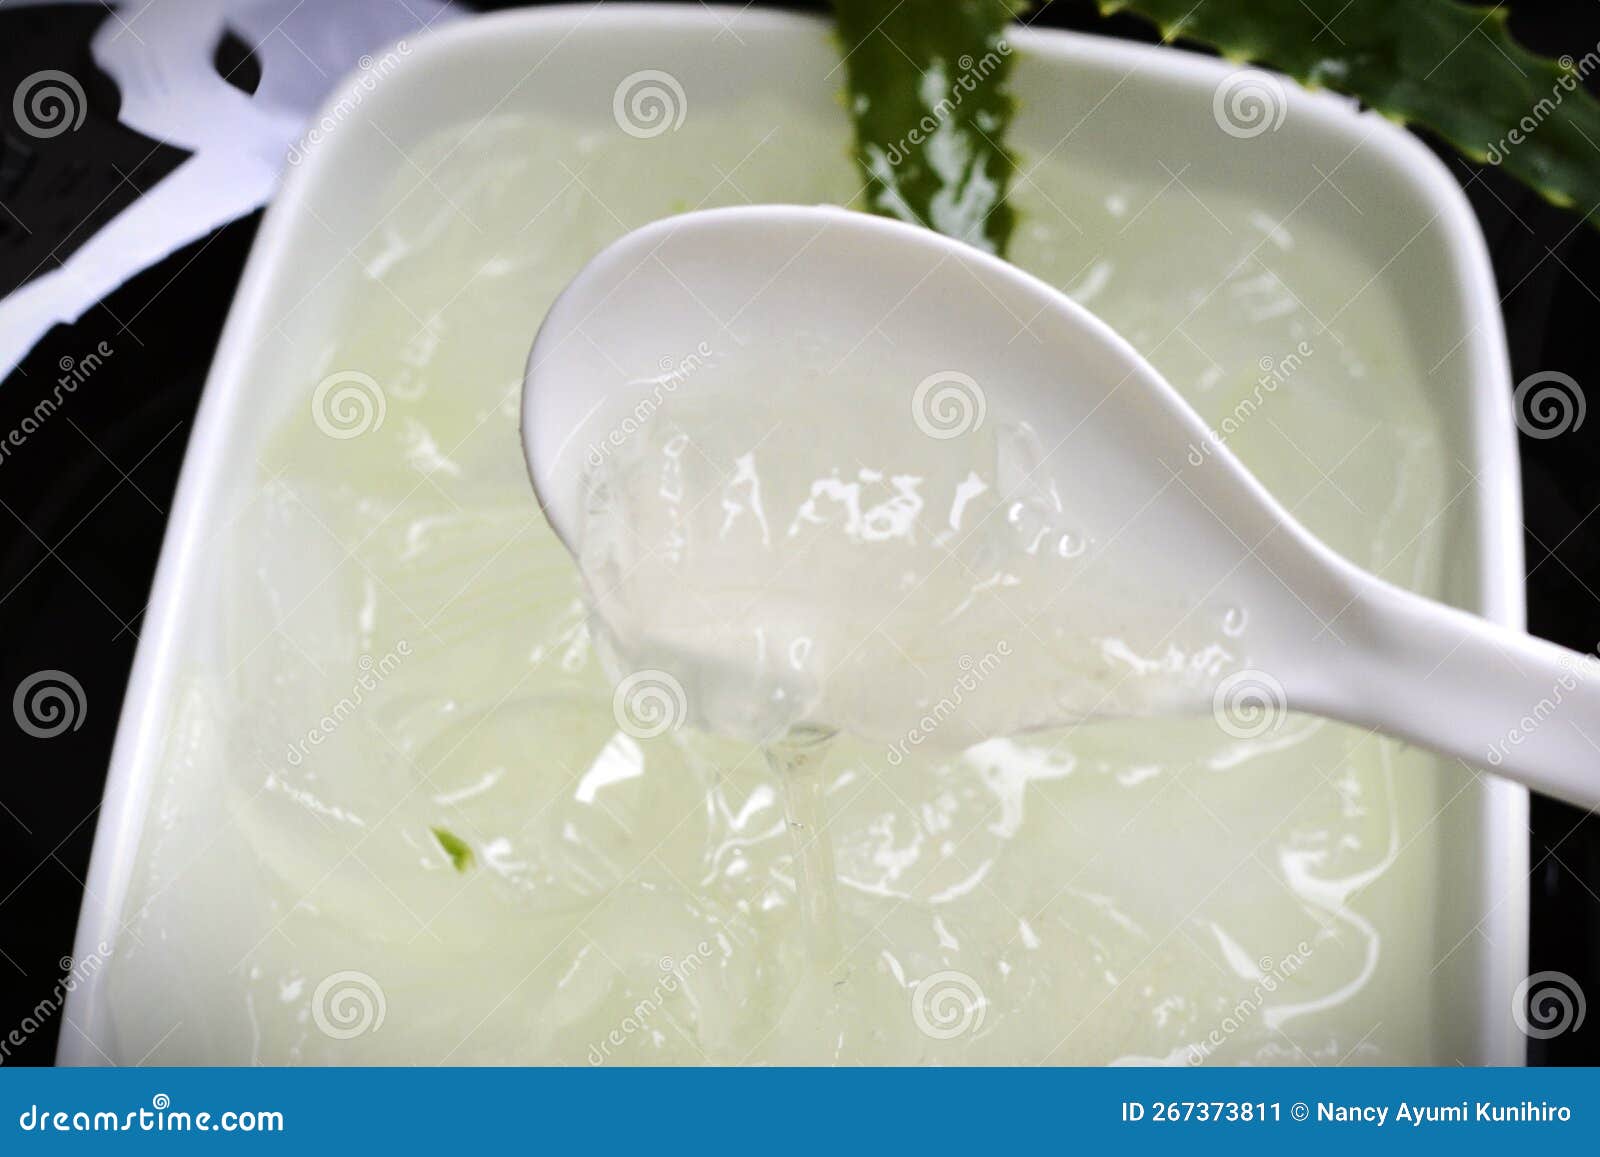 in the spoon the juice and goo taken from the aloe vera